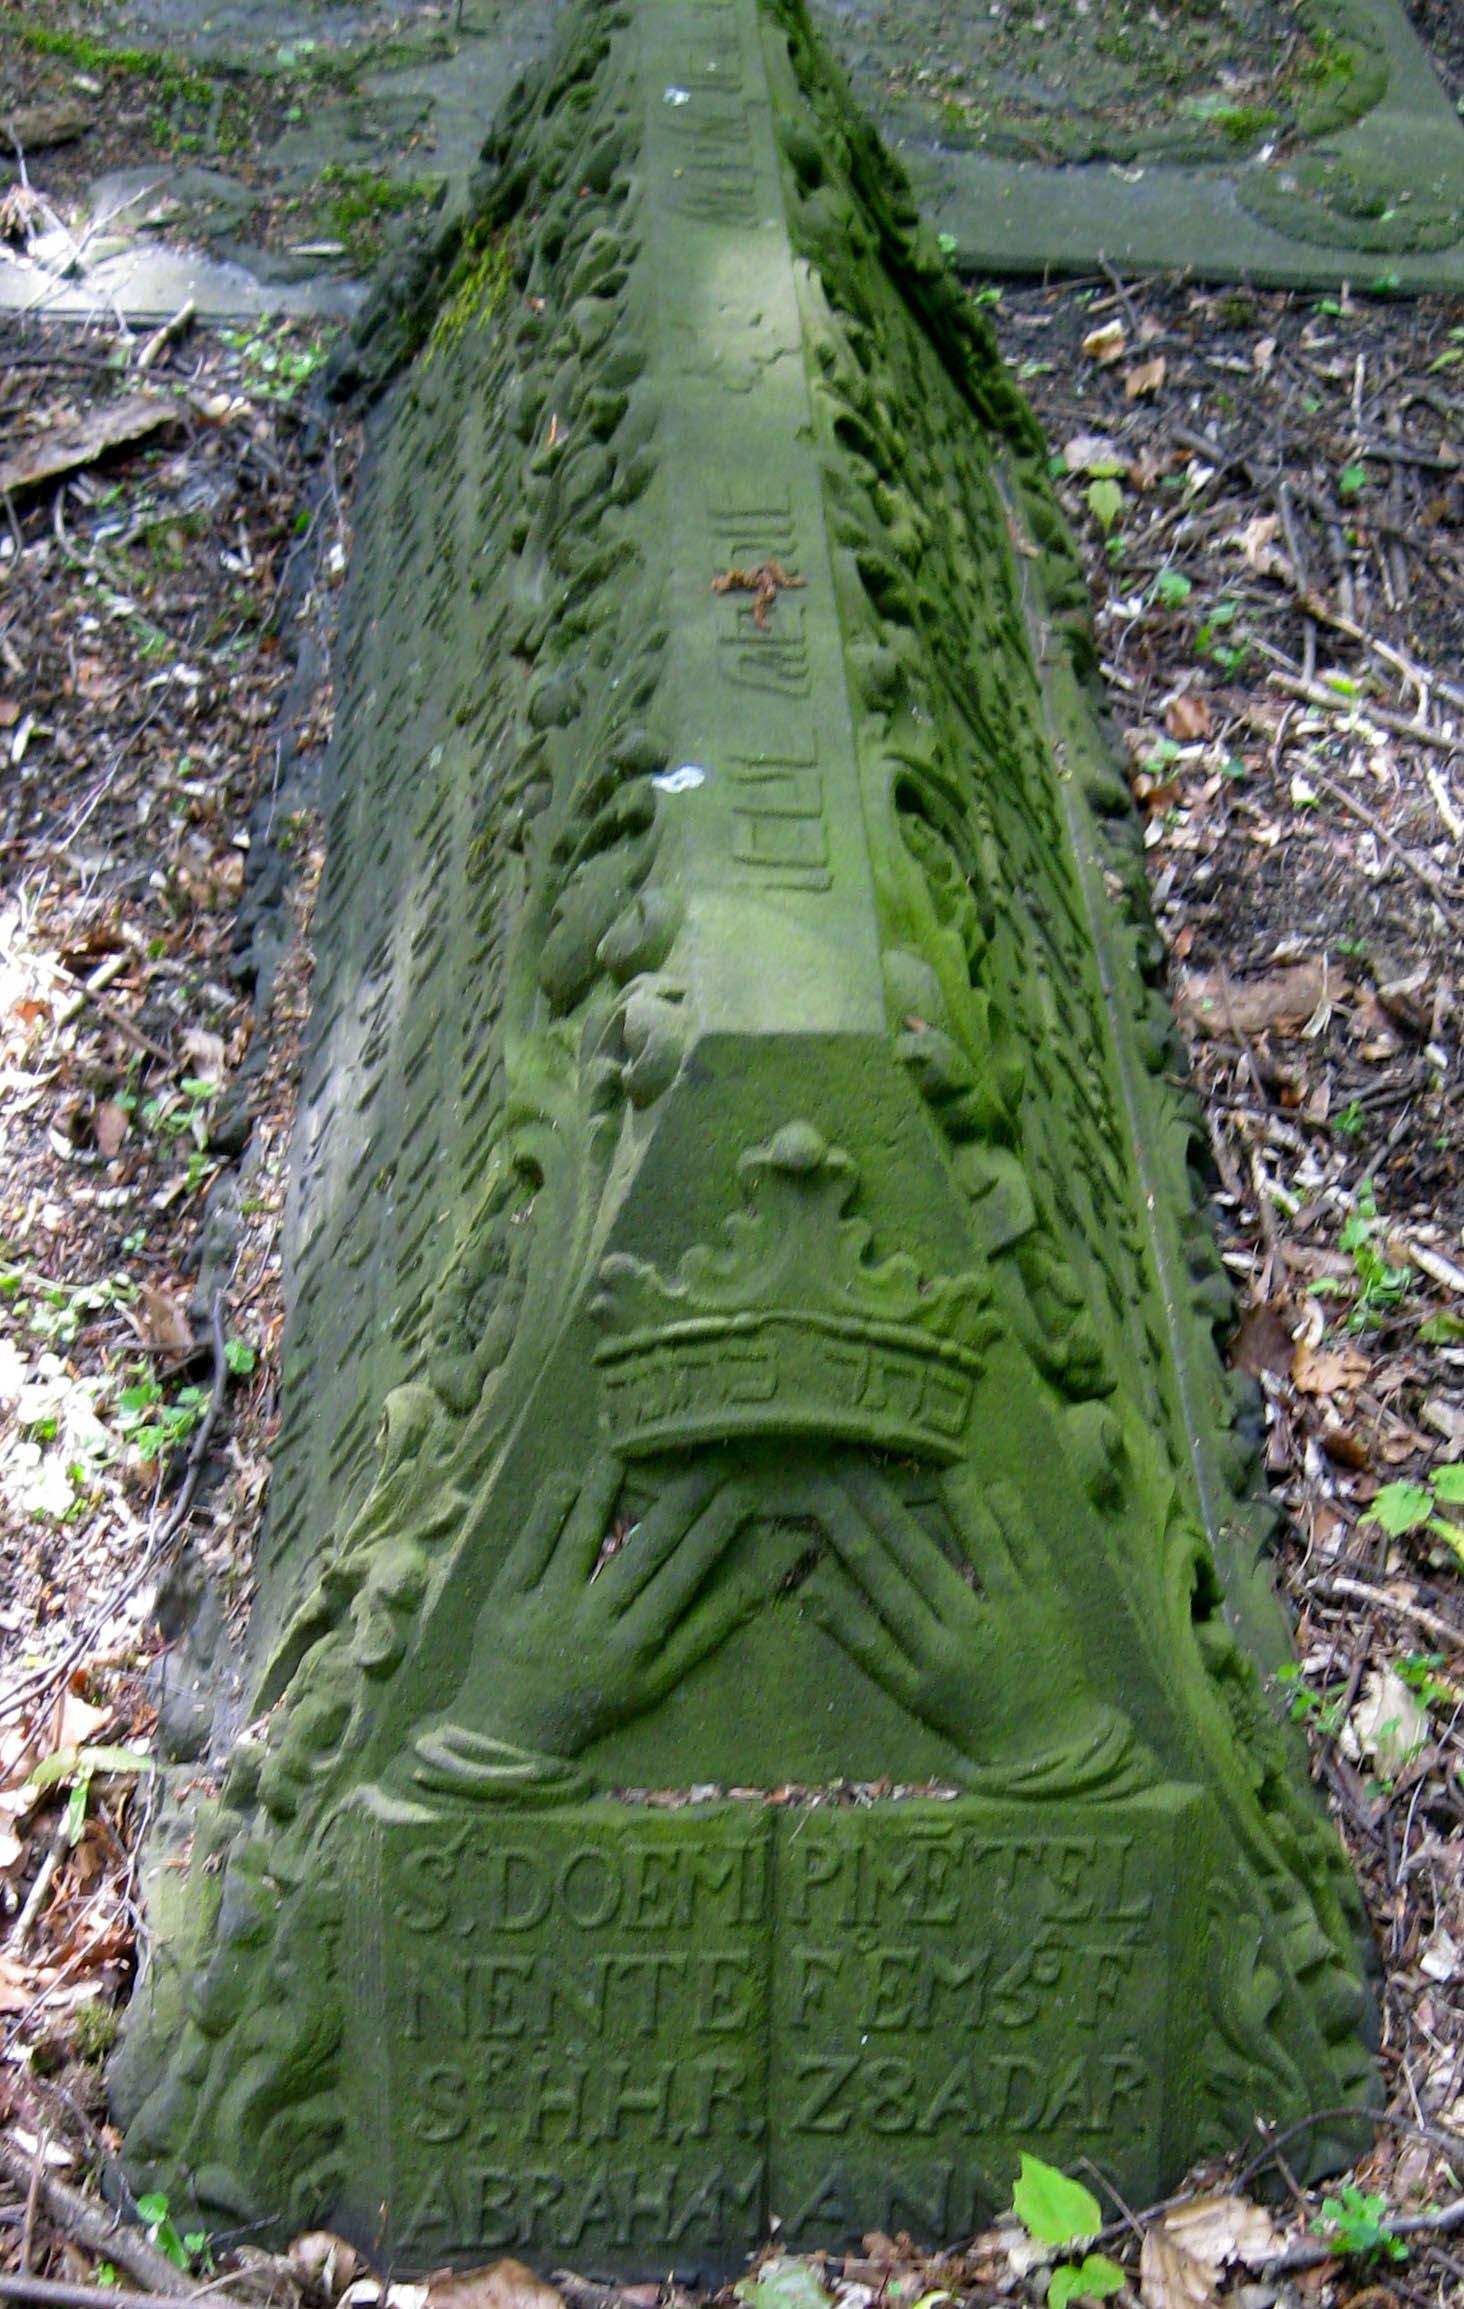 Tombstone in the shape of a triangular prism with carving of open book on short end with Hebrew and Portuguese inscriptions and decoration along length of stone. 